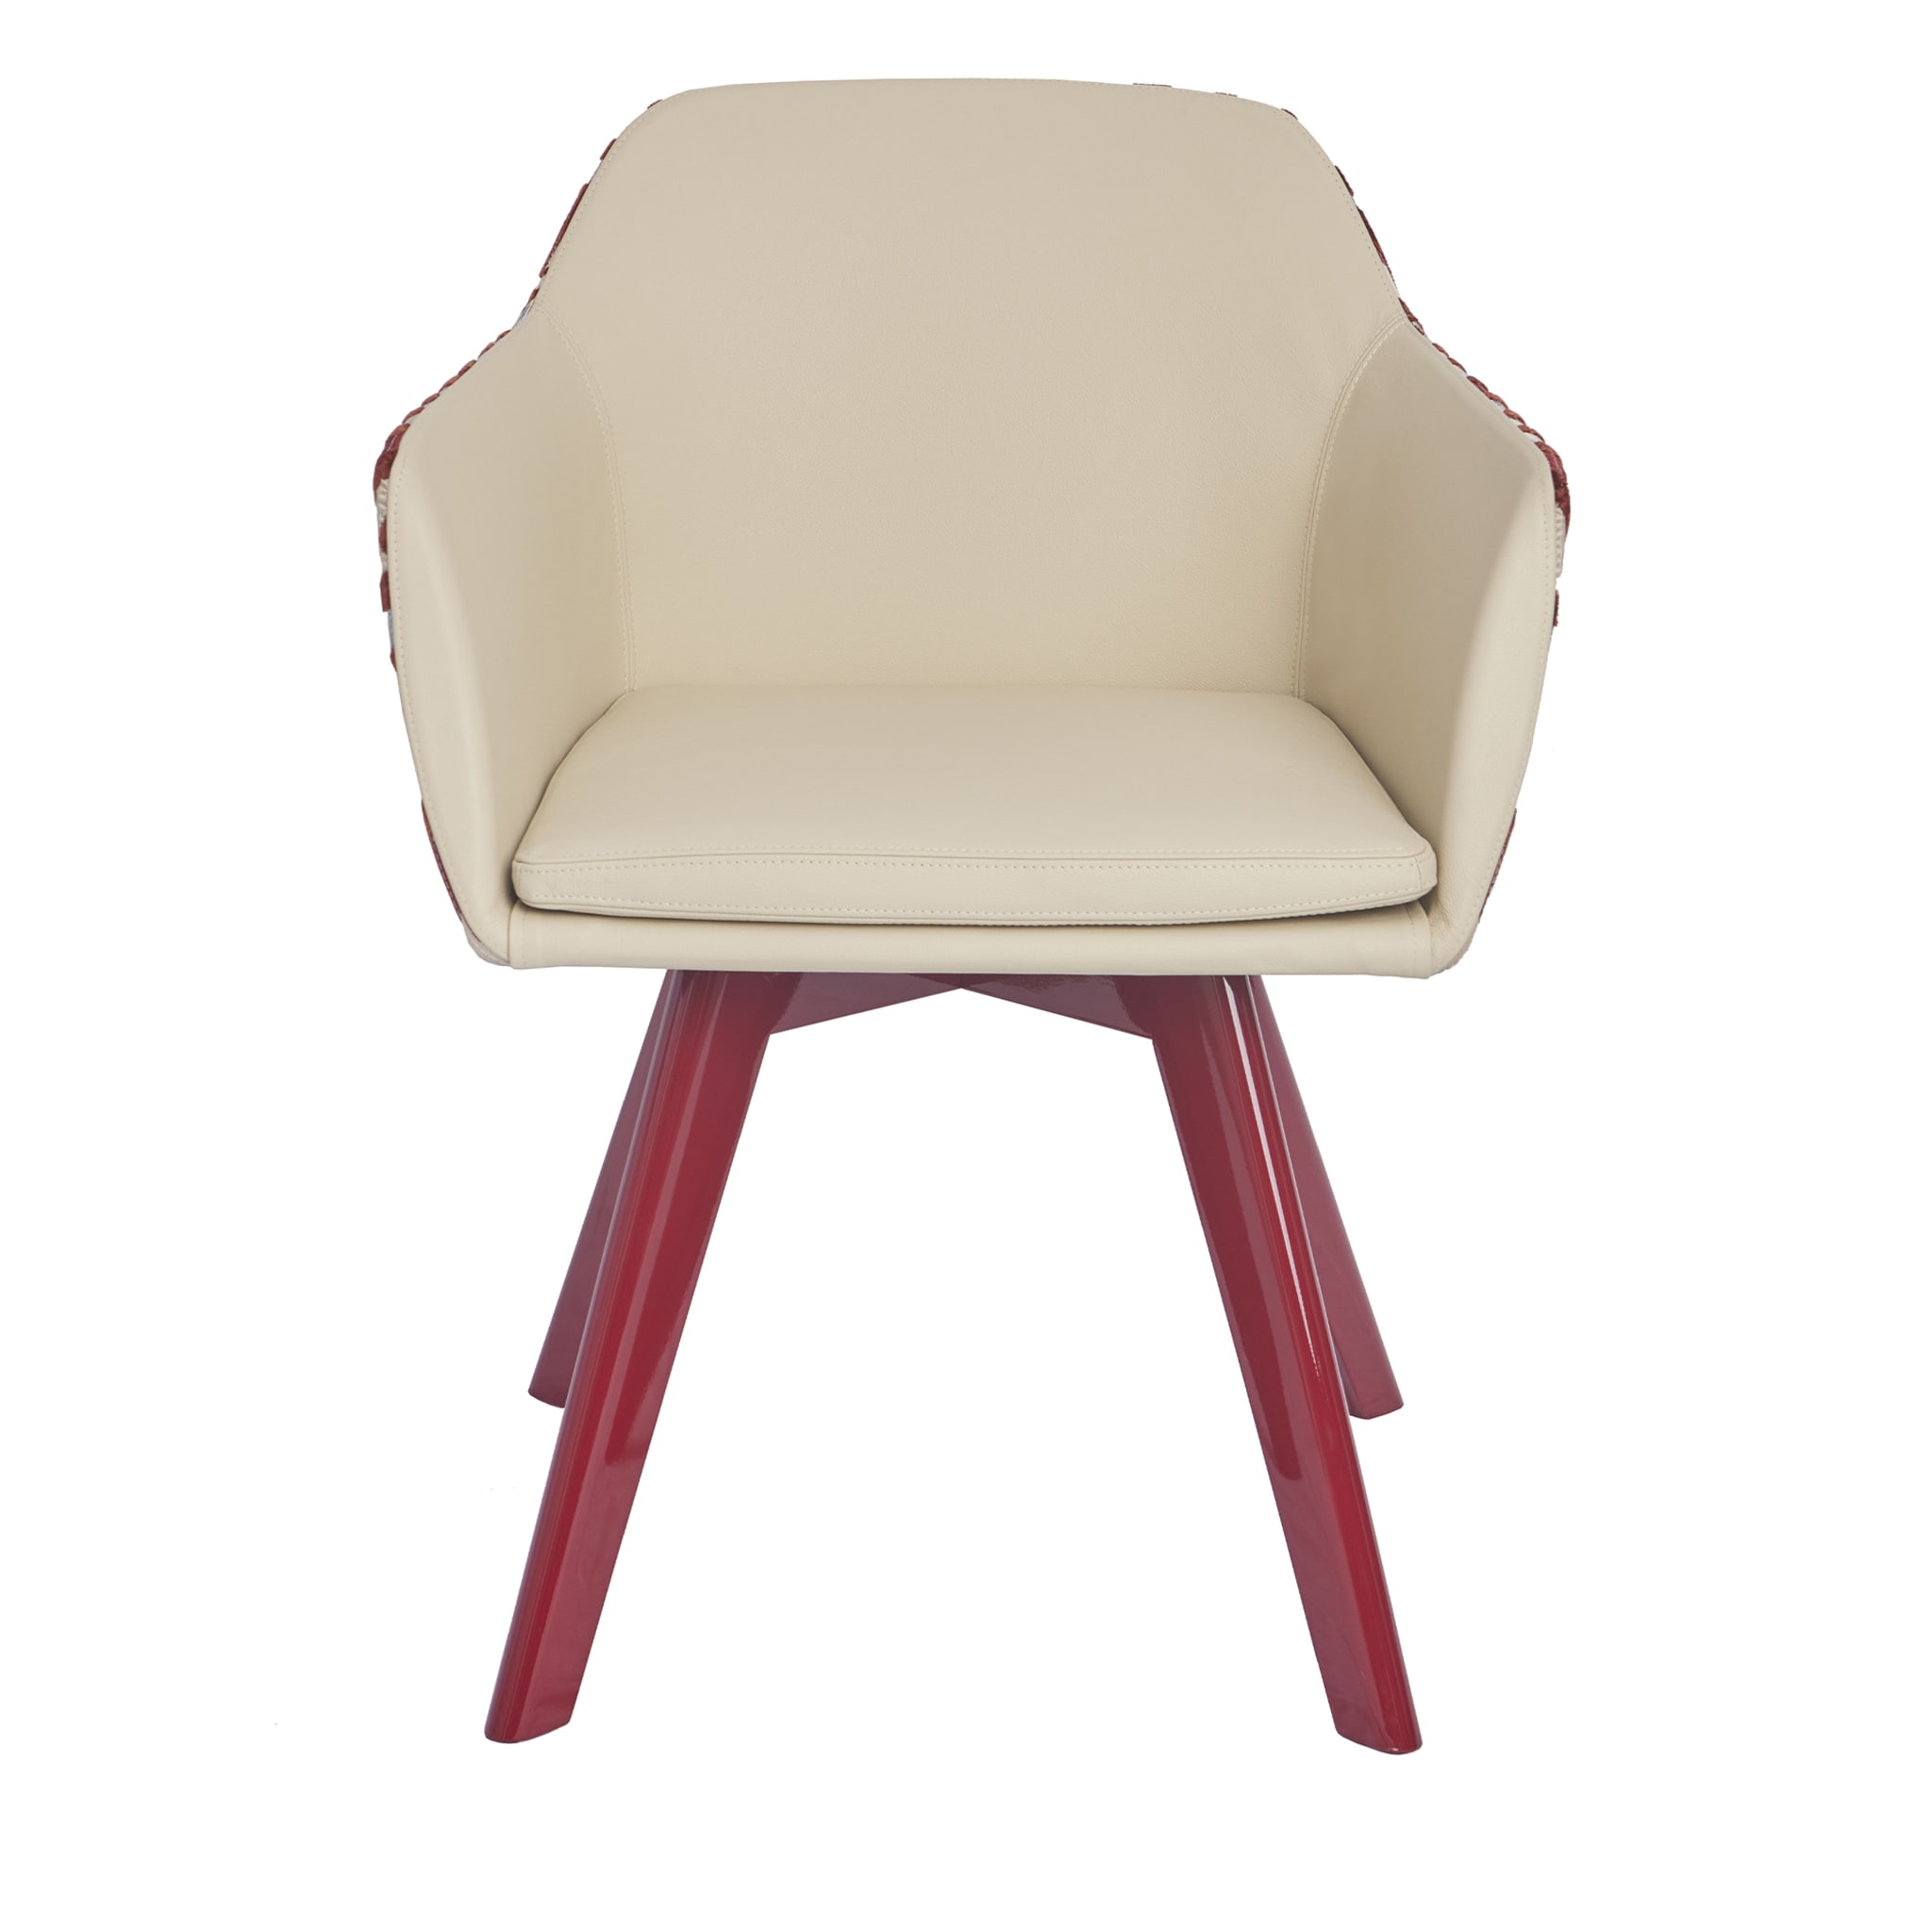 Nur PARIS chair Beige And Burgundy Patterned - Main view